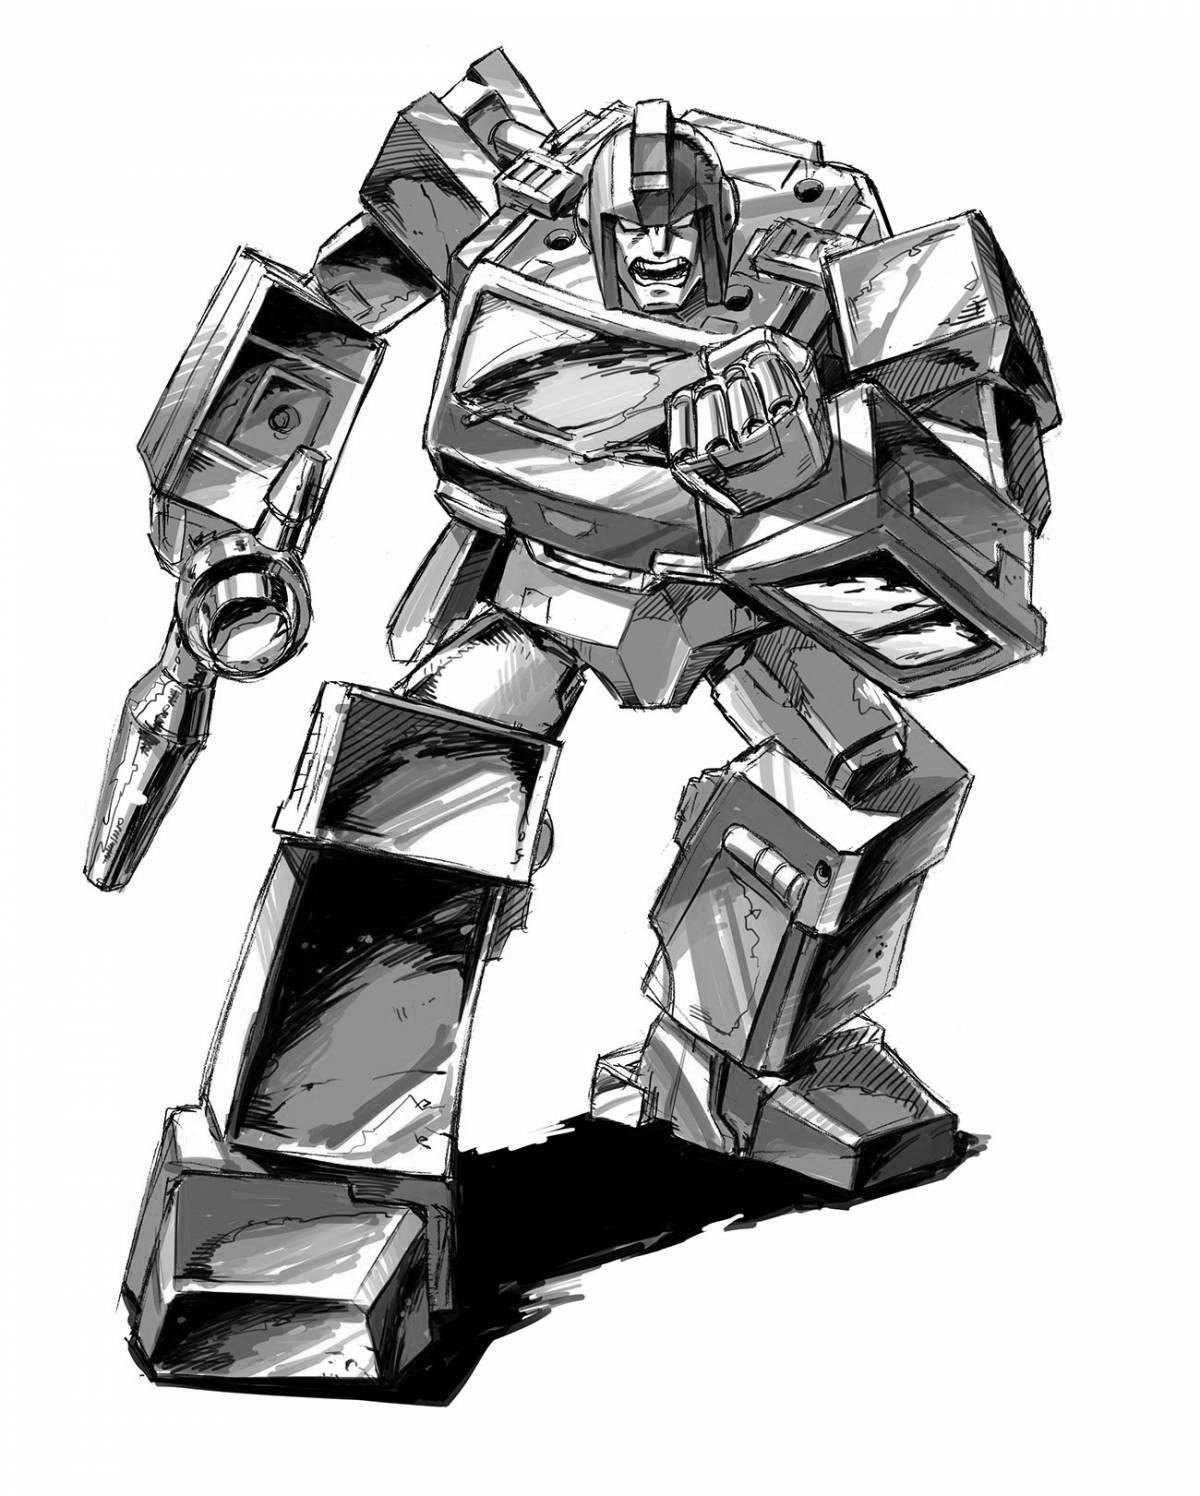 Fairytale ironhide coloring page